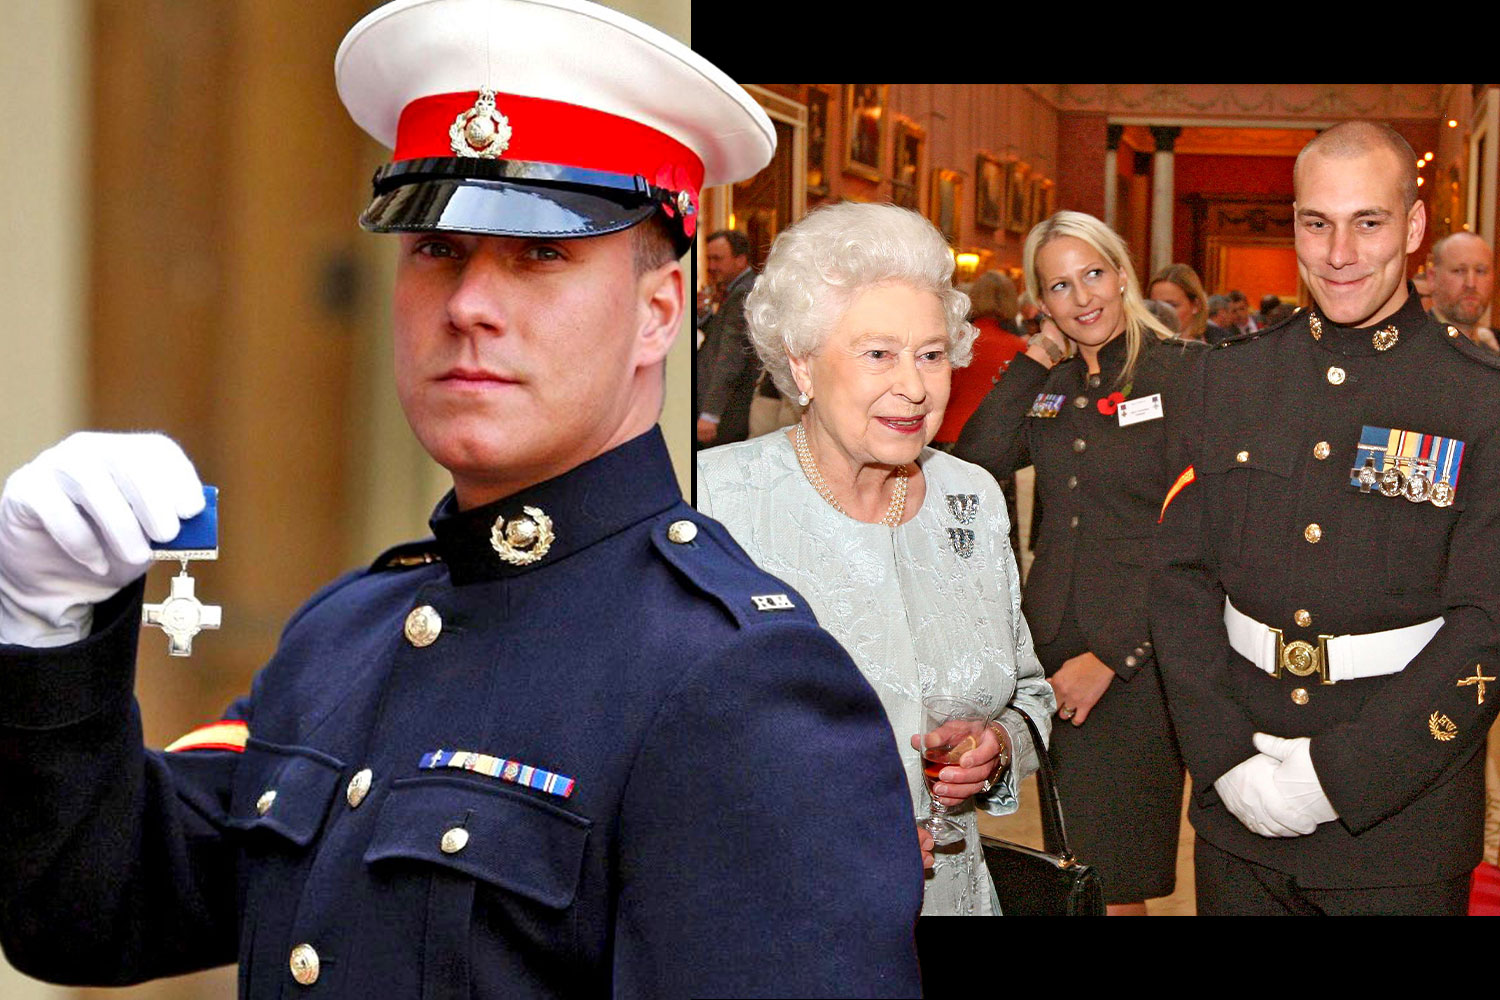 Former lance corporal Matt Croucher, who holds the George Cross, met the Queen at a reception in 2010